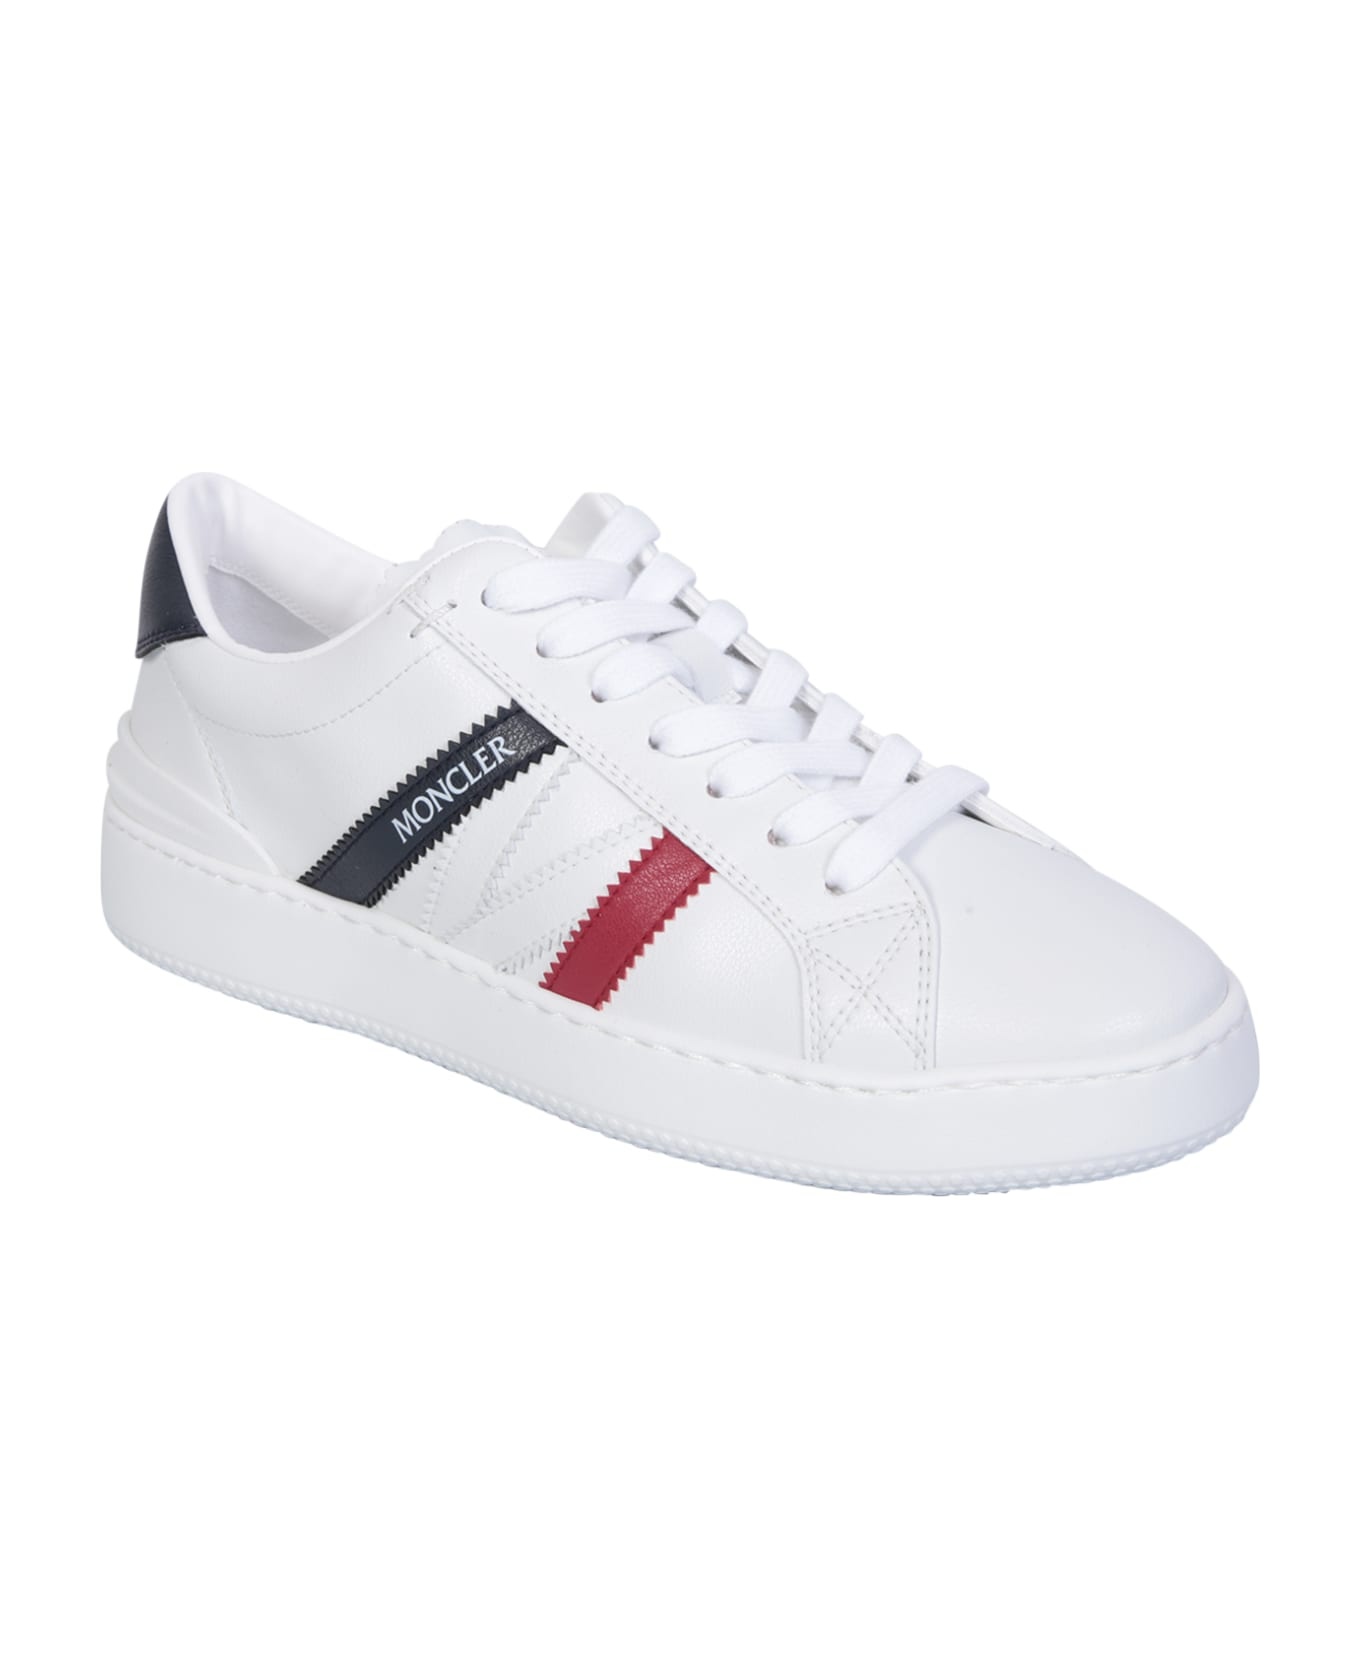 Monaco M Sneakers In White, Blue And Red - 2